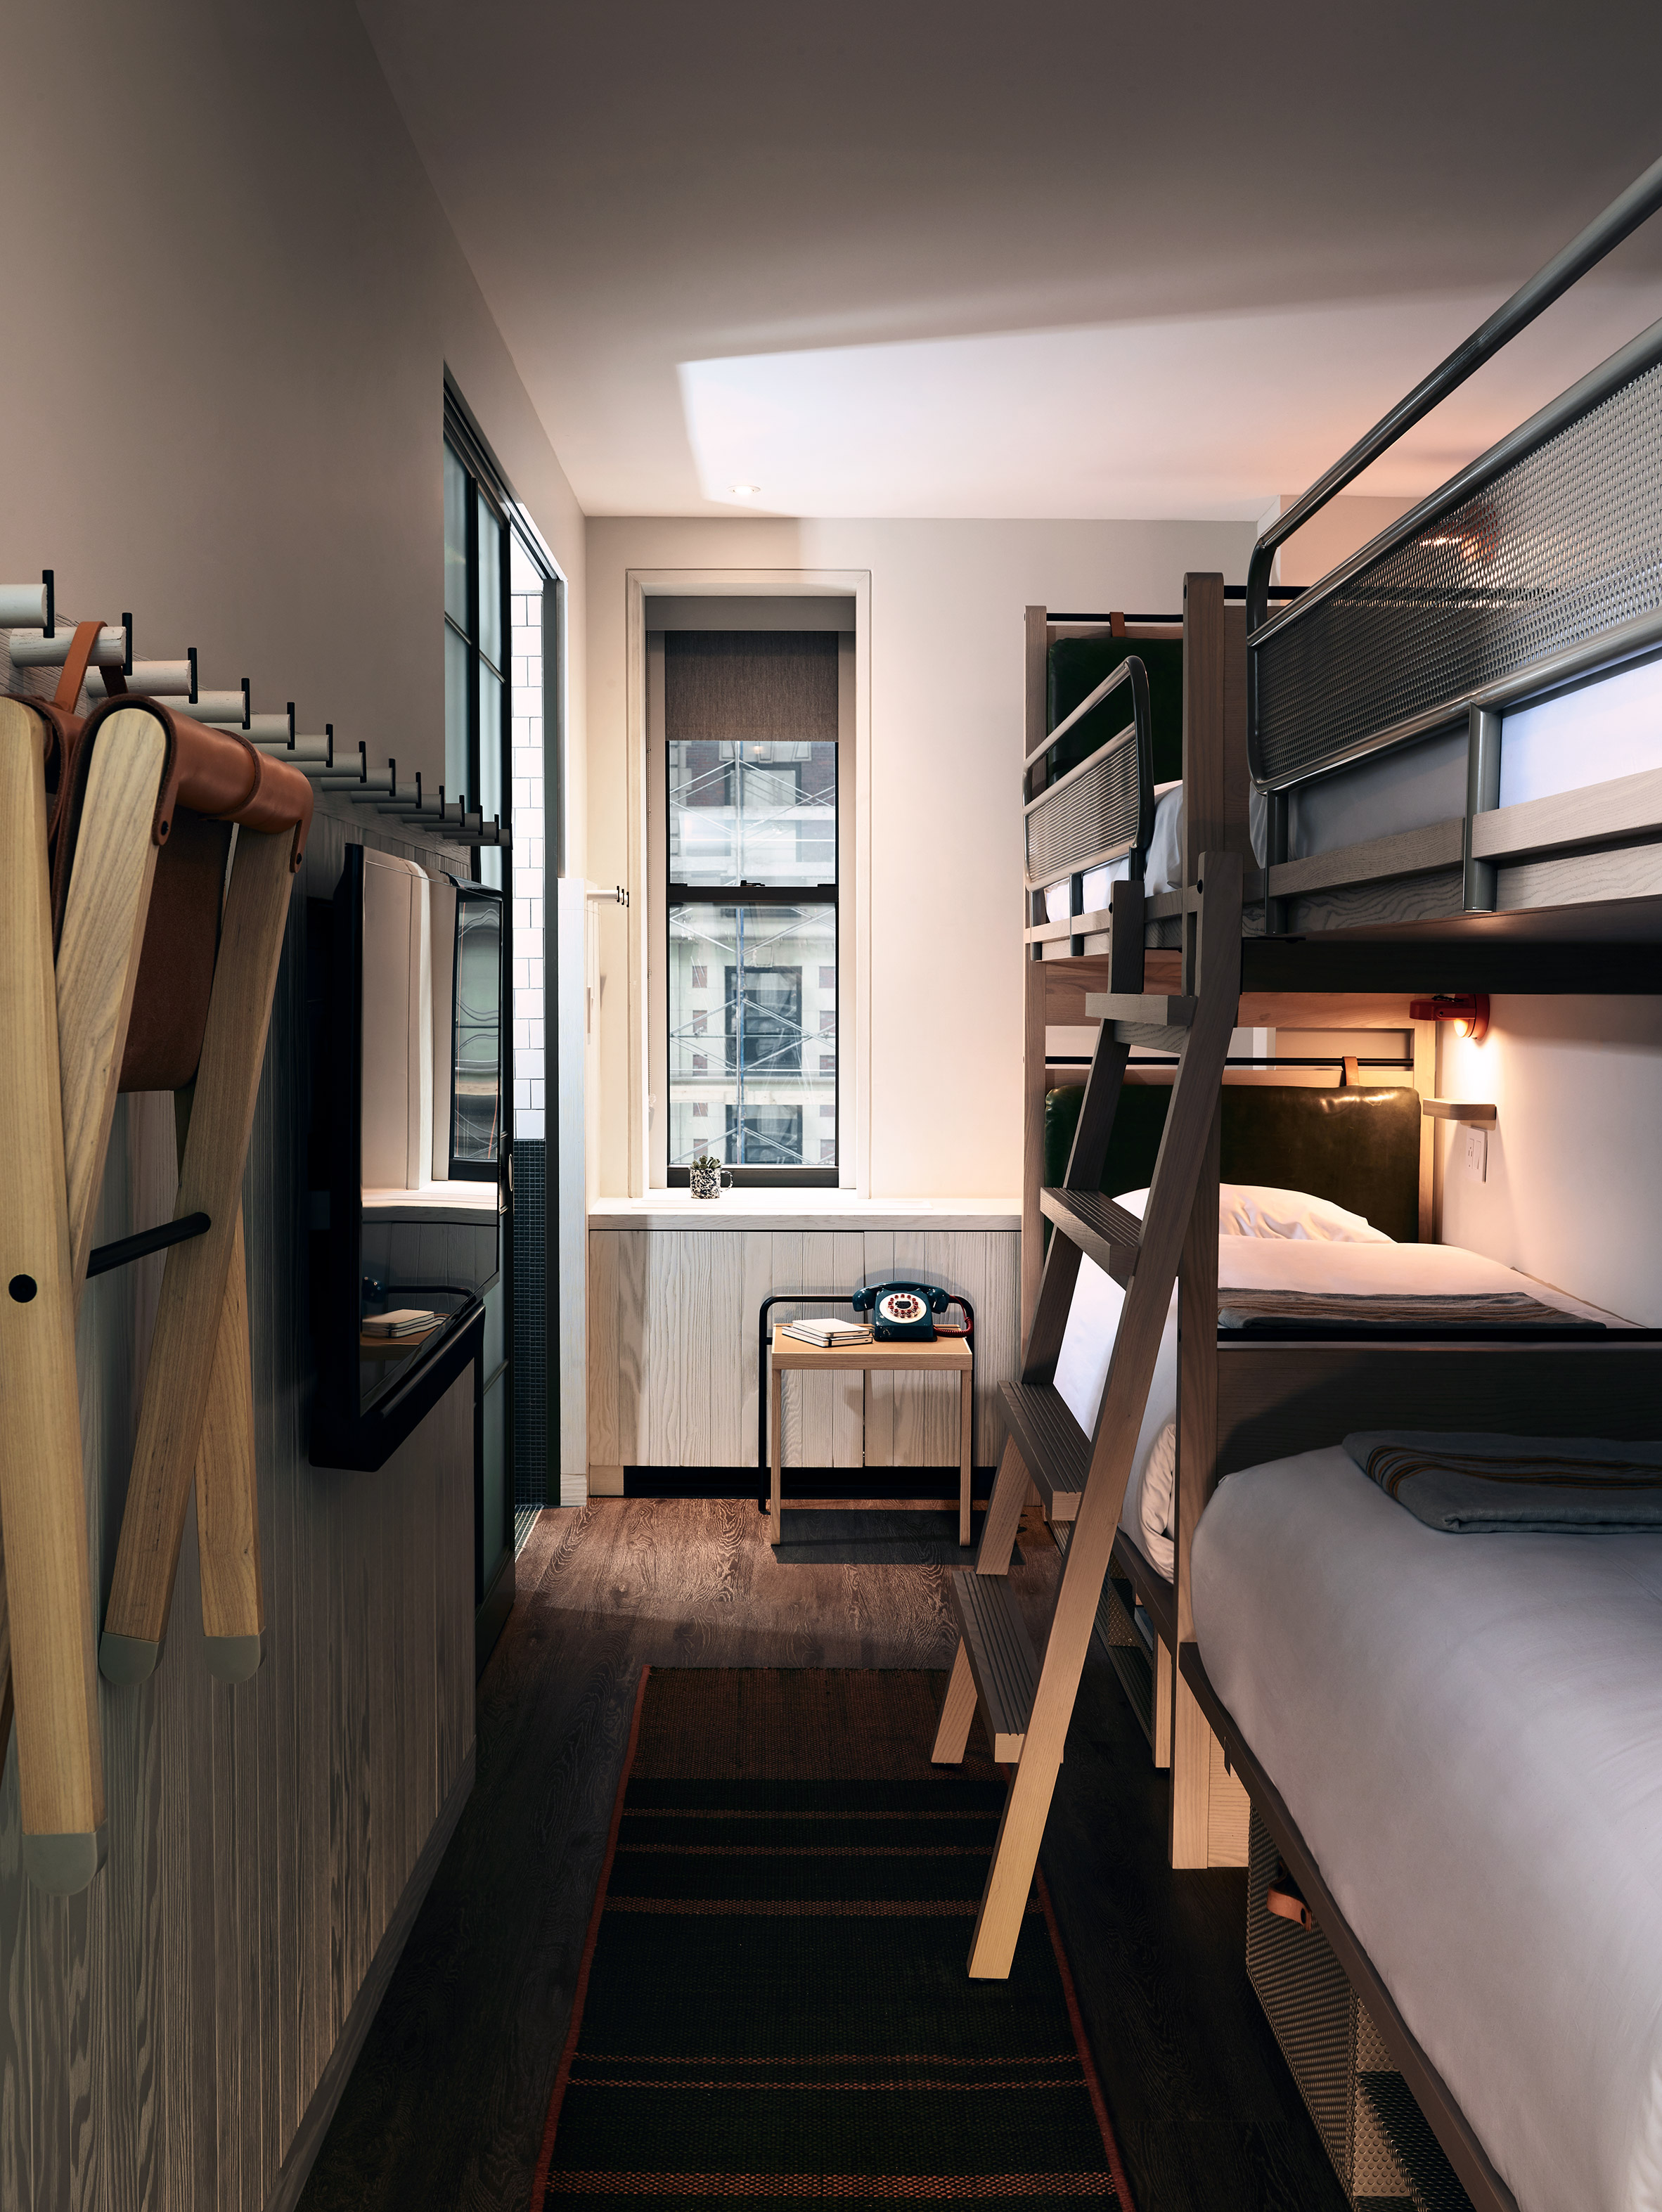 Bedrooms At Moxy Times Square Hotel, Bunk Bed Hotel Nyc